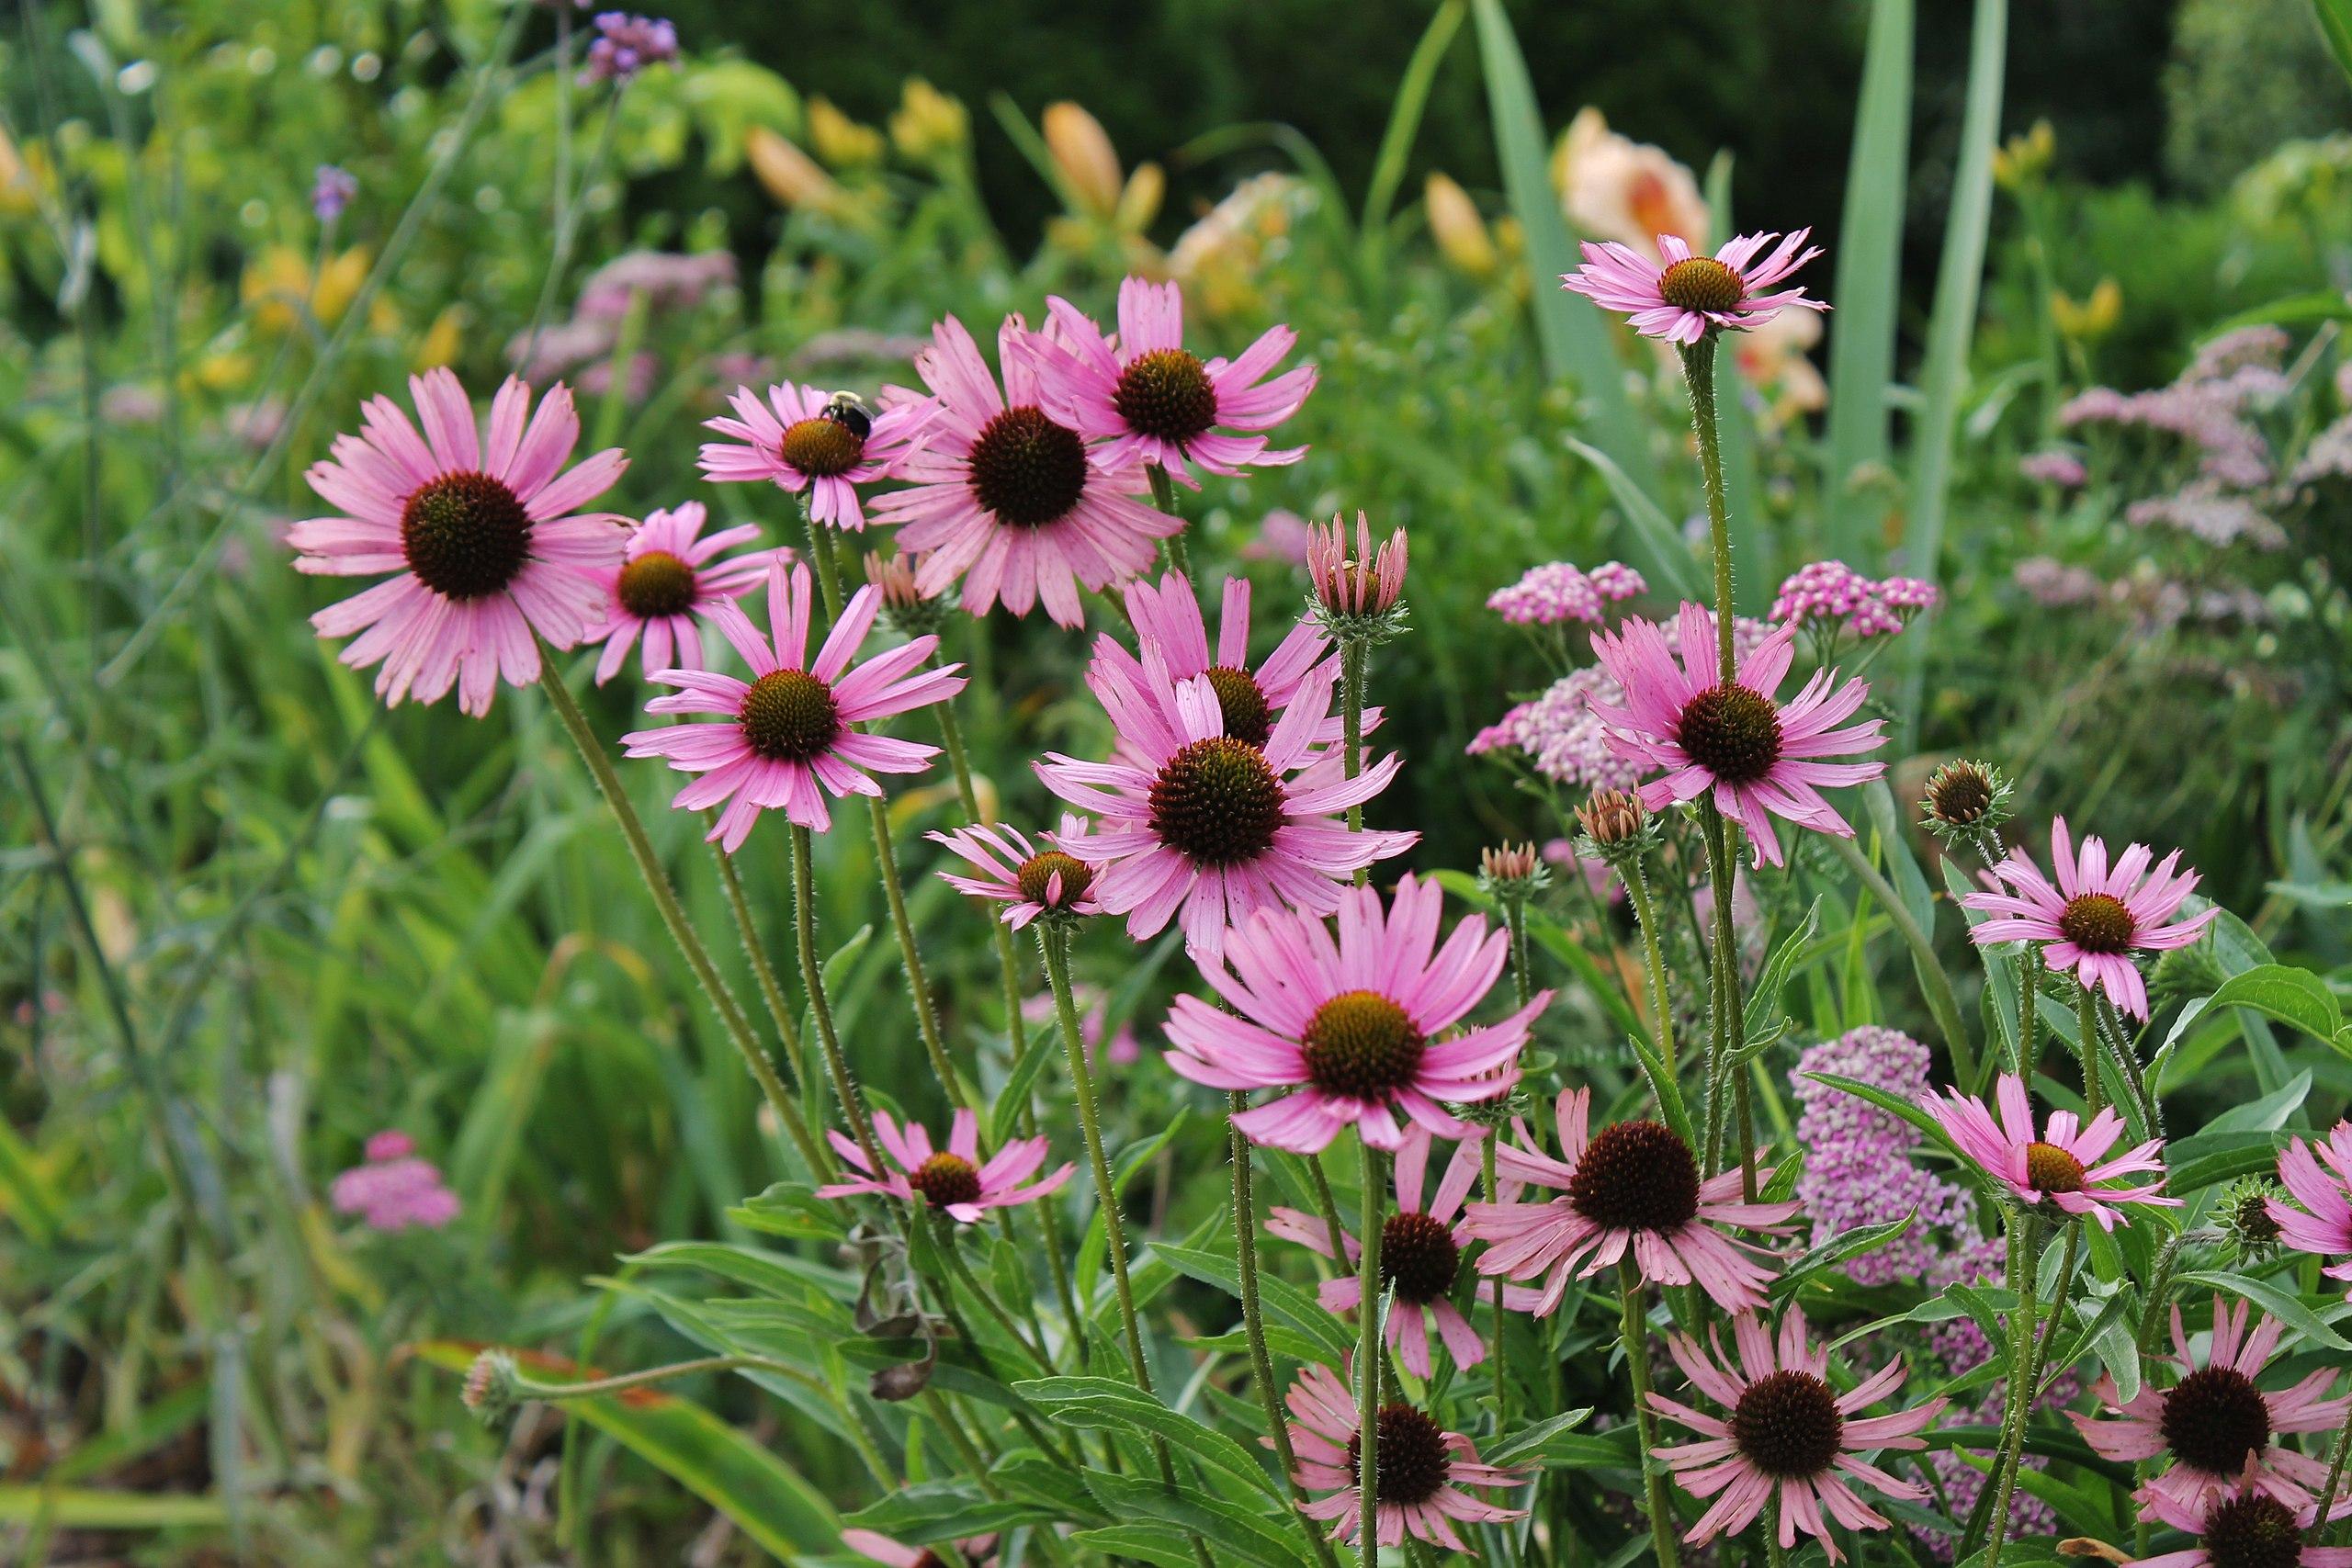 light-pink flowers with burgundy-green center, green stems and leaves